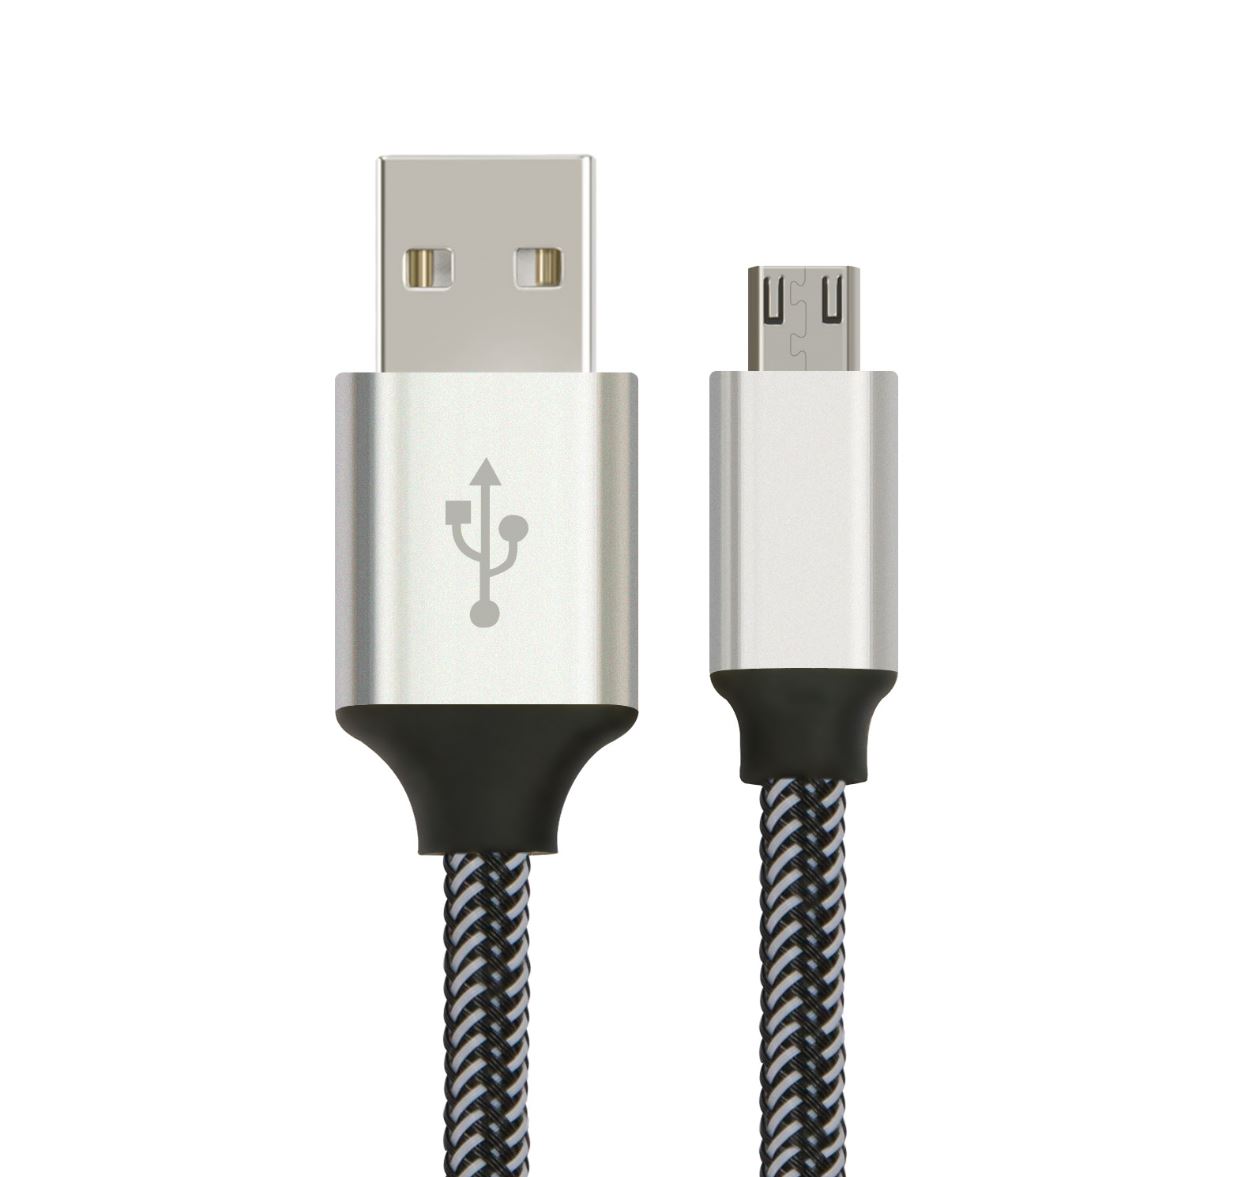 Cables/Astrotek: Astrotek, 2m, Micro, USB, Data, Sync, Charger, Cable, Cord, Silver, White, Color, for, Samsung, HTC, Motorola, Nokia, Kndle, Android, Phone, 